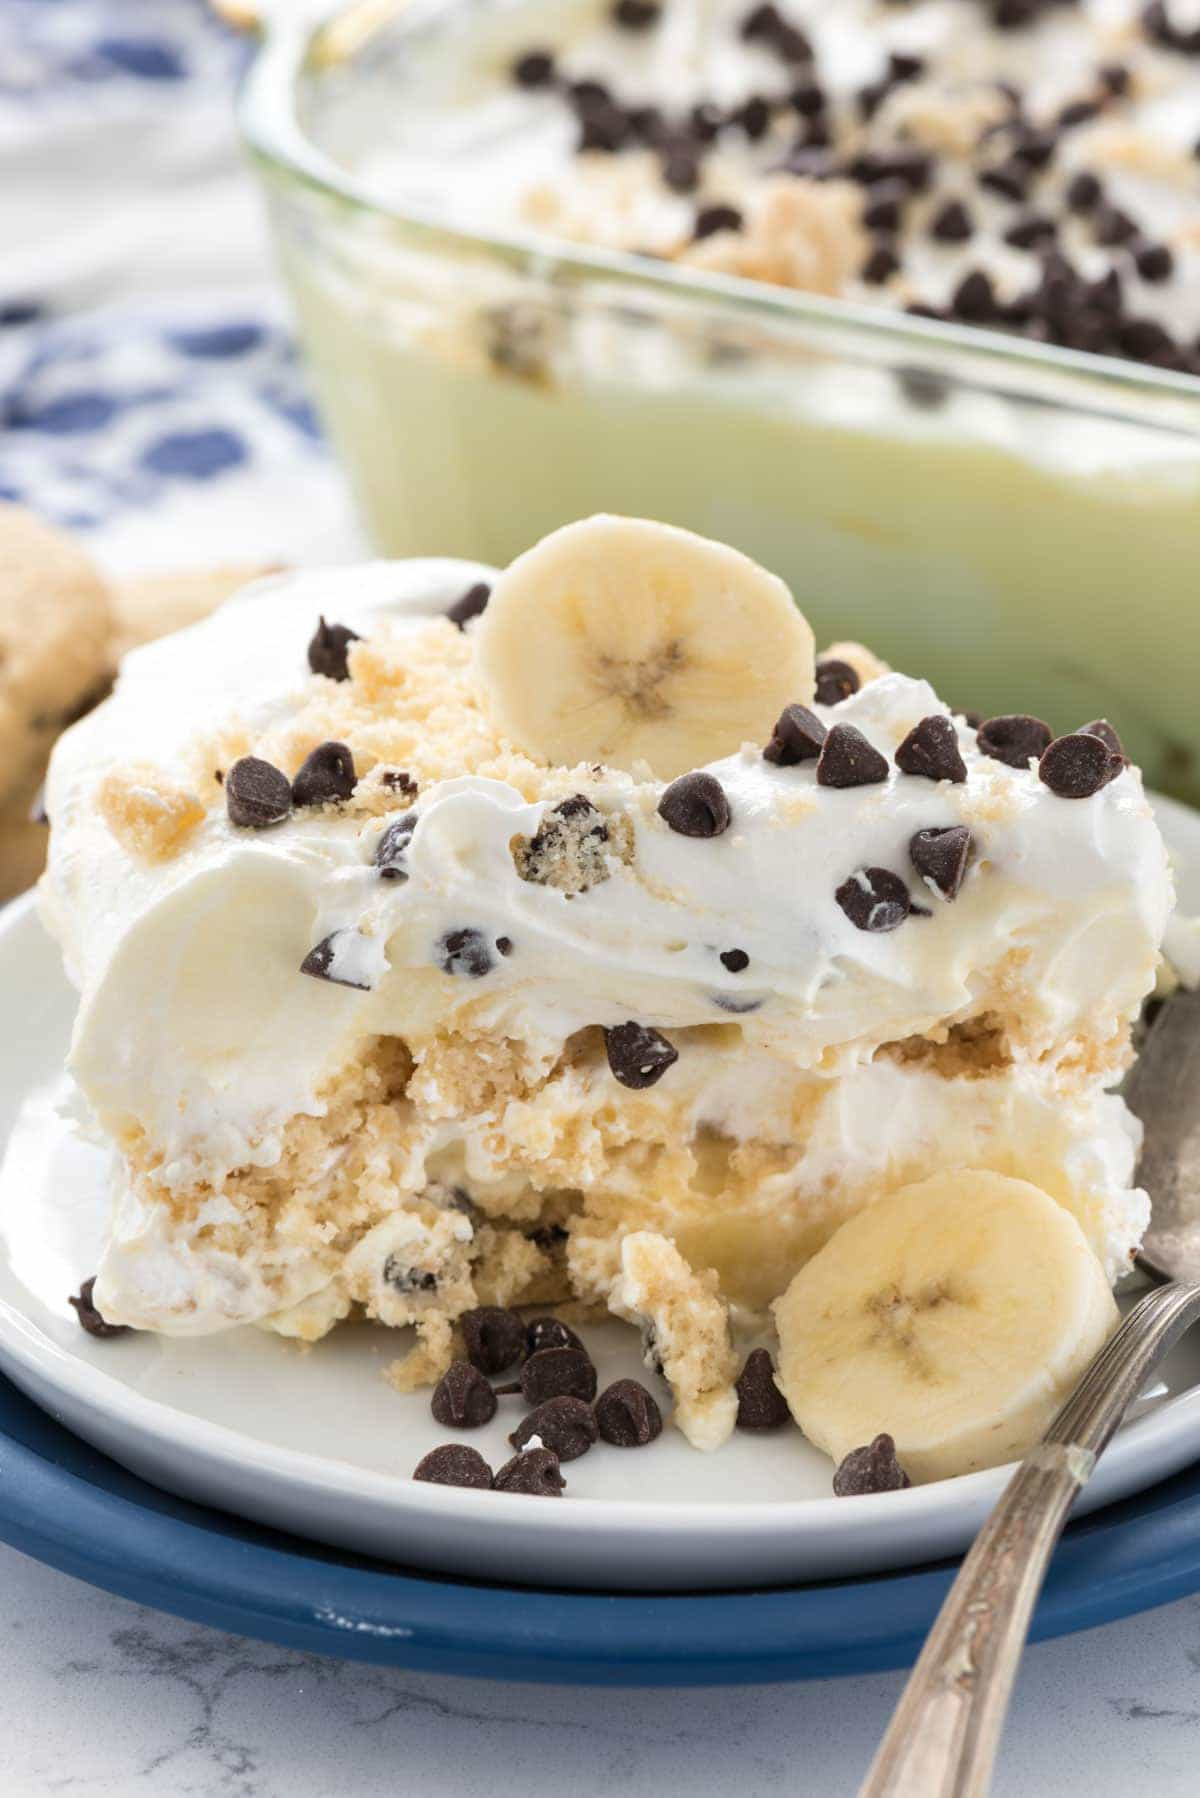 Easy Desserts With Chocolate Chips
 No Bake Banana Chocolate Chip Shortbread Icebox Cake